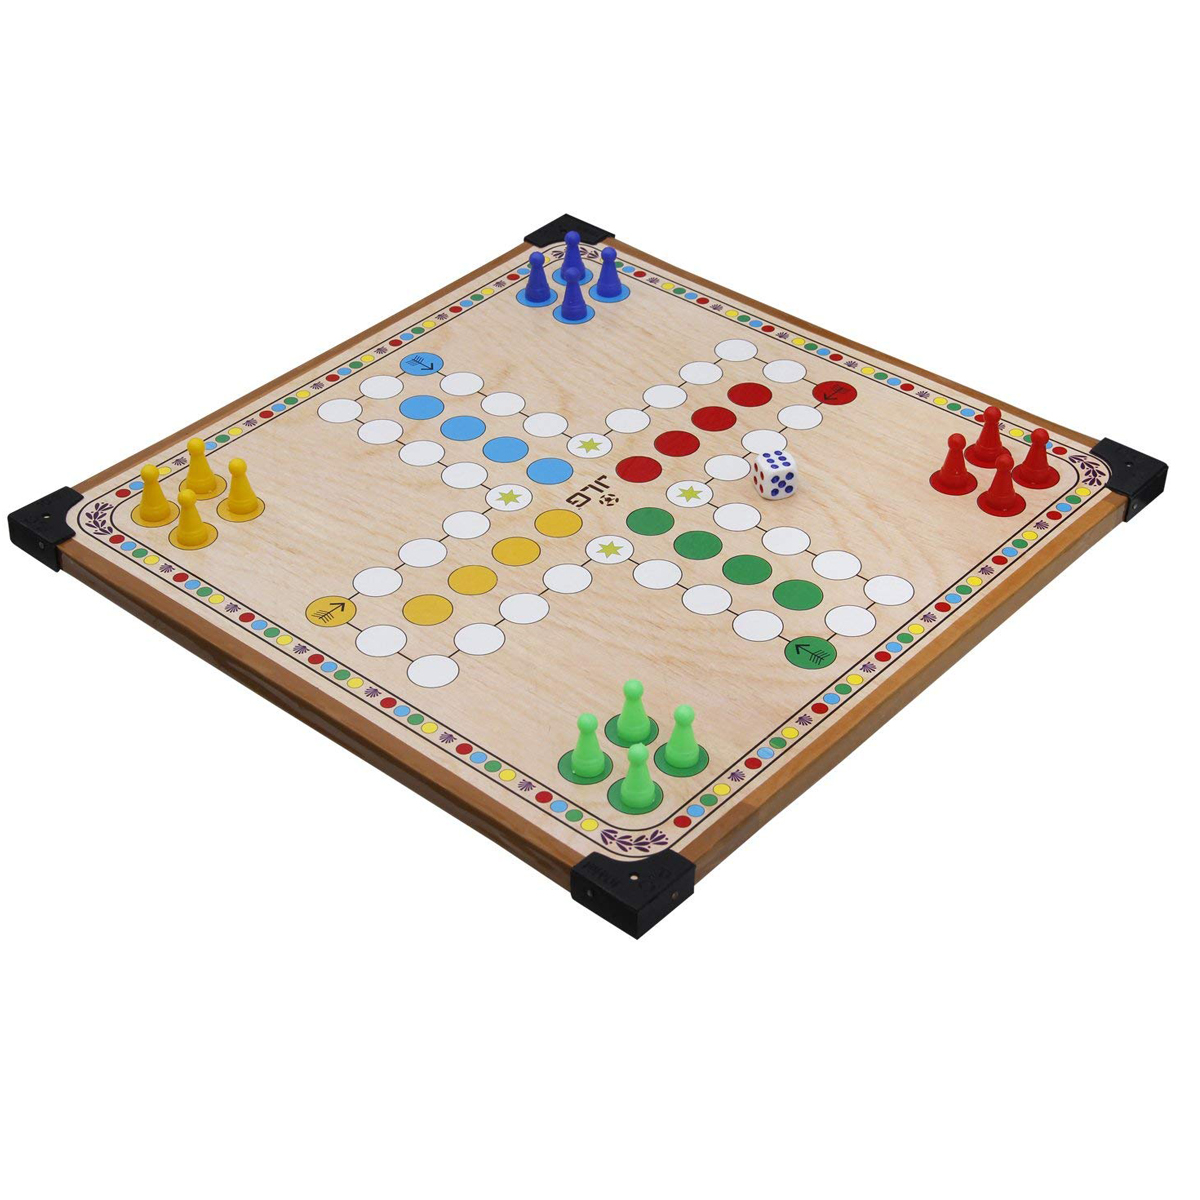 Sports 12x12 Wooden Ludo And Chinese Checker with Dice and Tokens(Wooden)